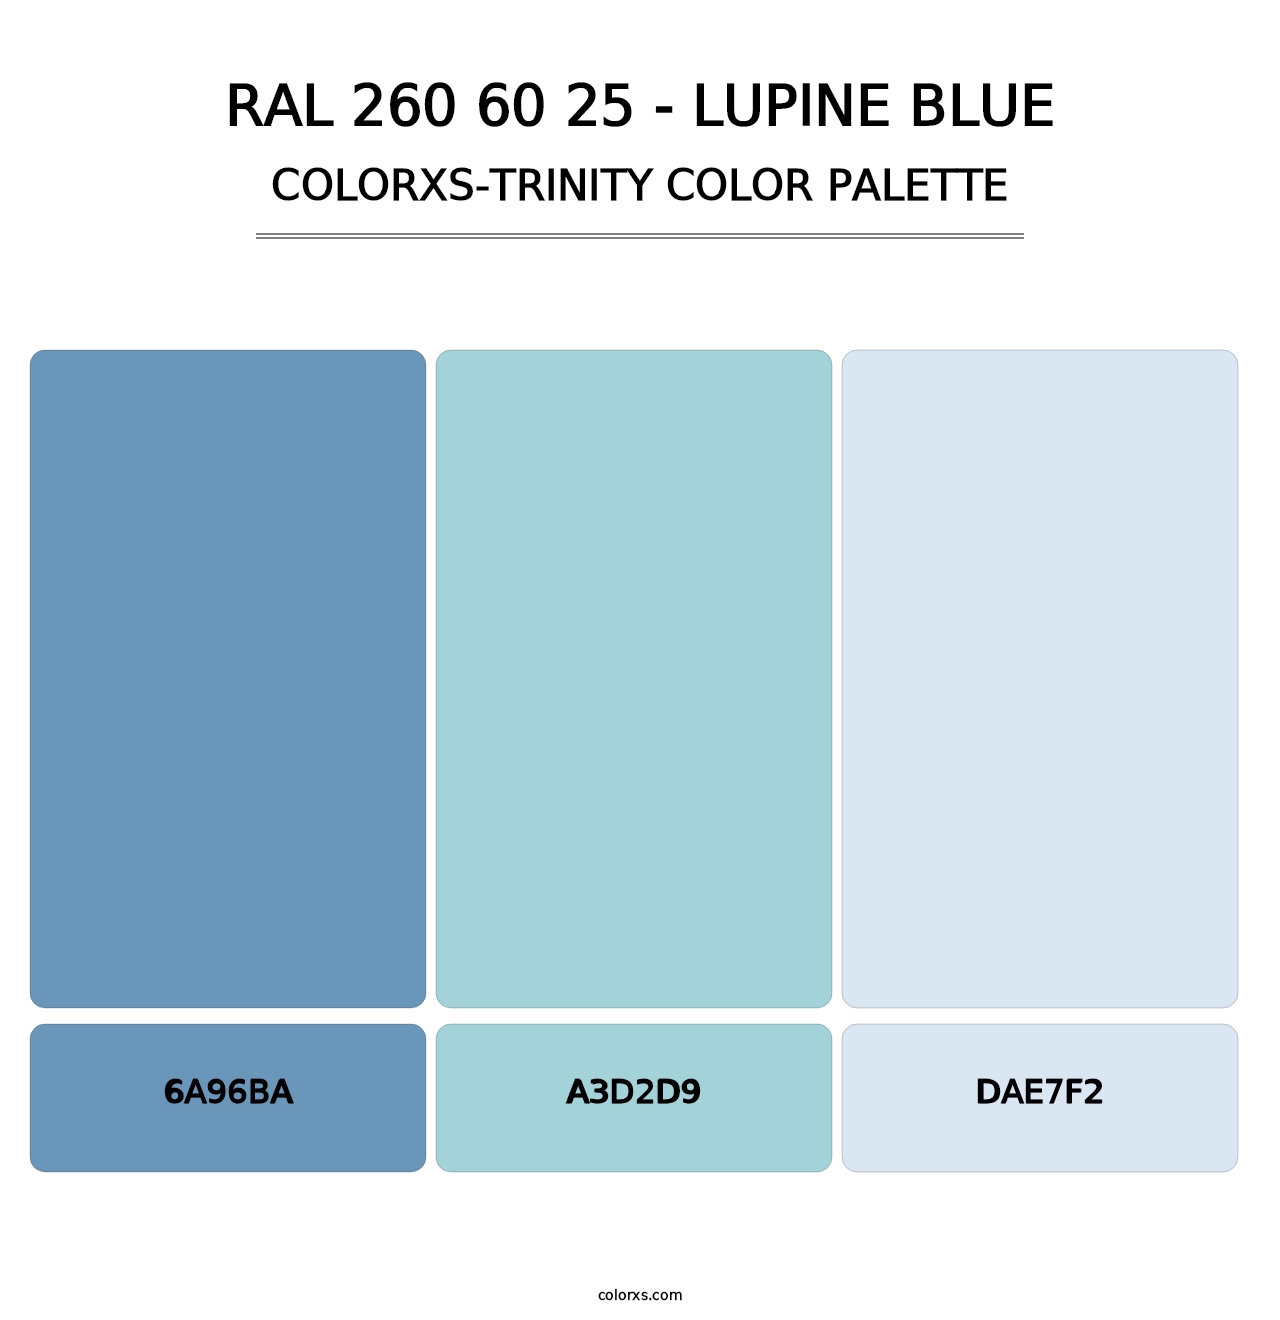 RAL 260 60 25 - Lupine Blue - Colorxs Trinity Palette